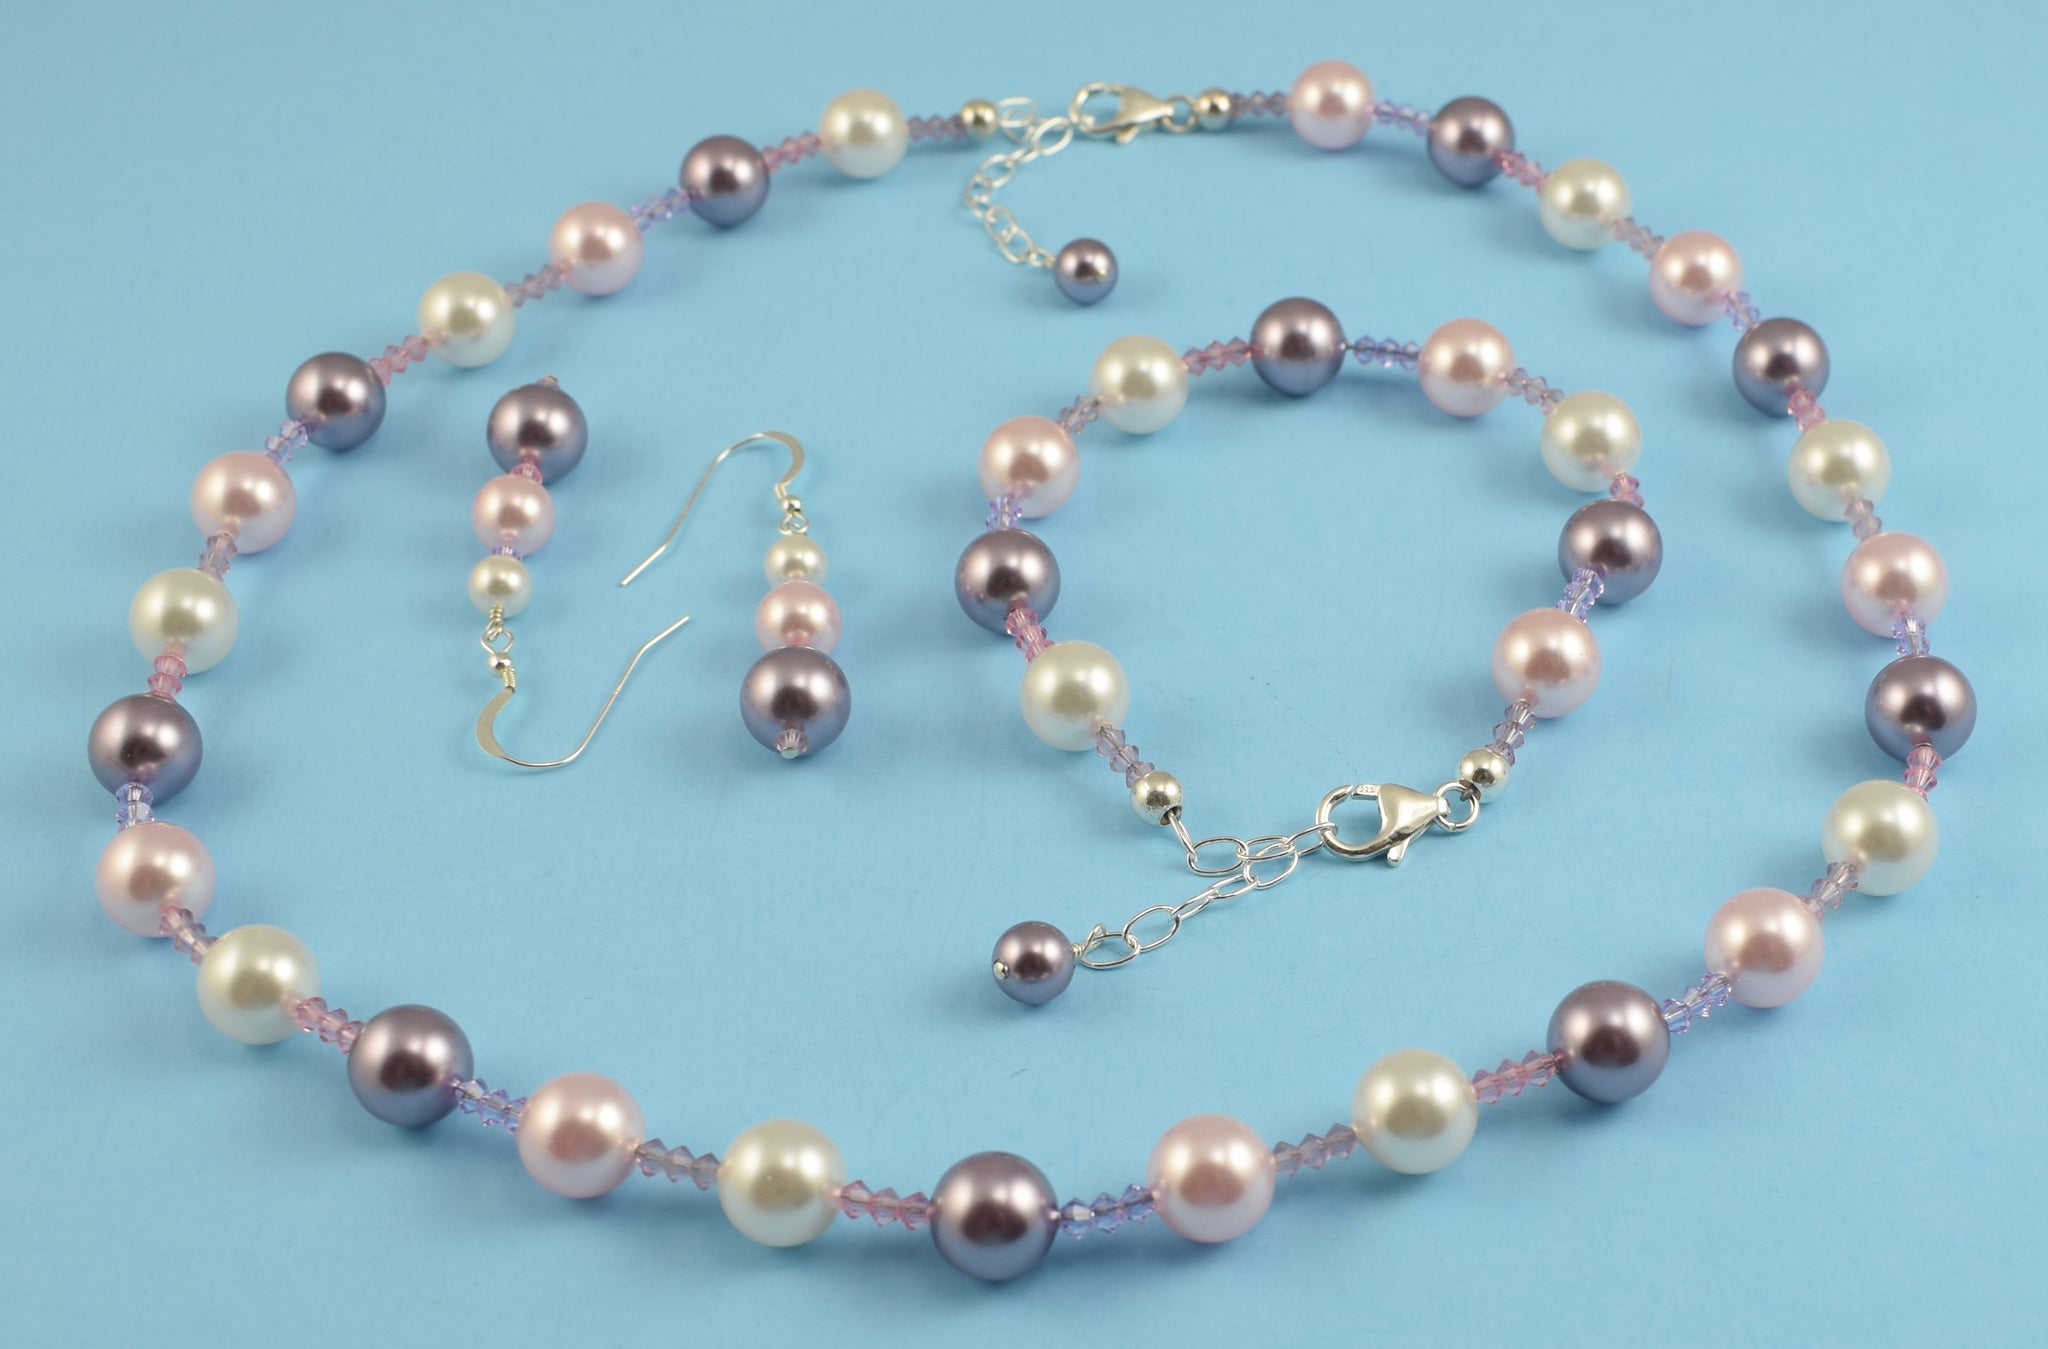 Rose, Lavender, & White Pearls Made With Swarovski Crystal Elements